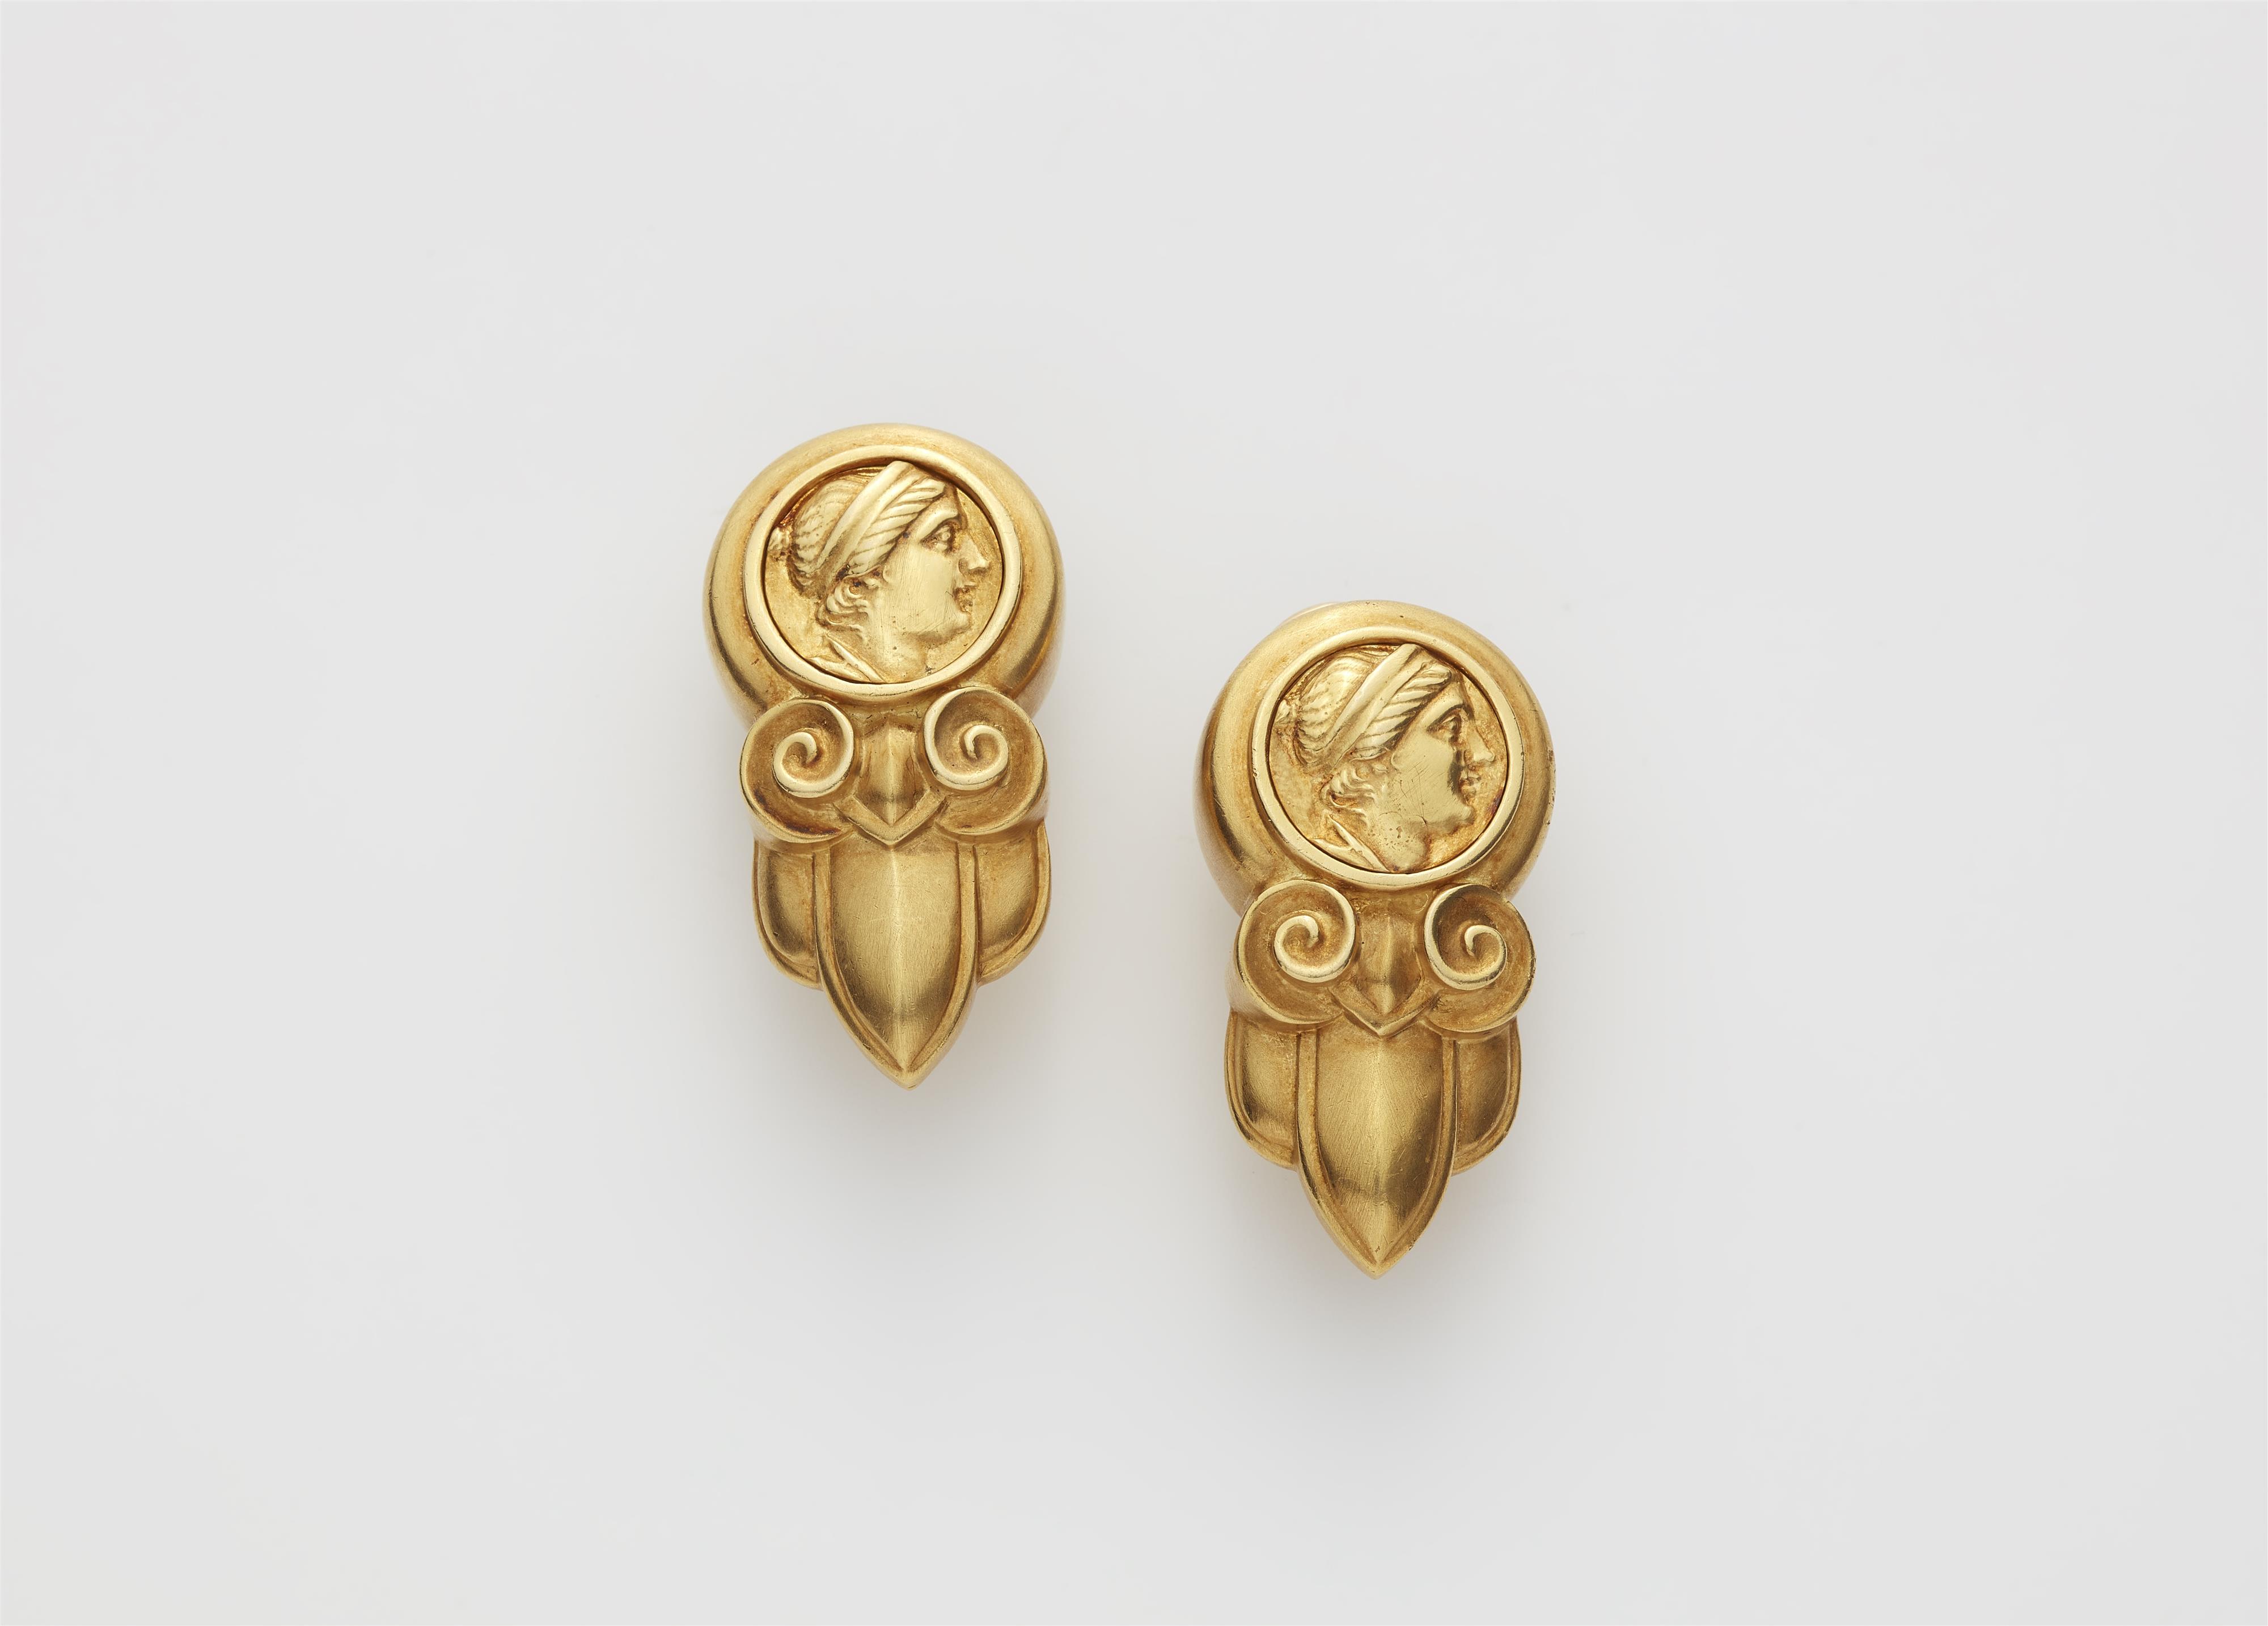 A pair of 18k gold Antique Revival style earrings - image-1